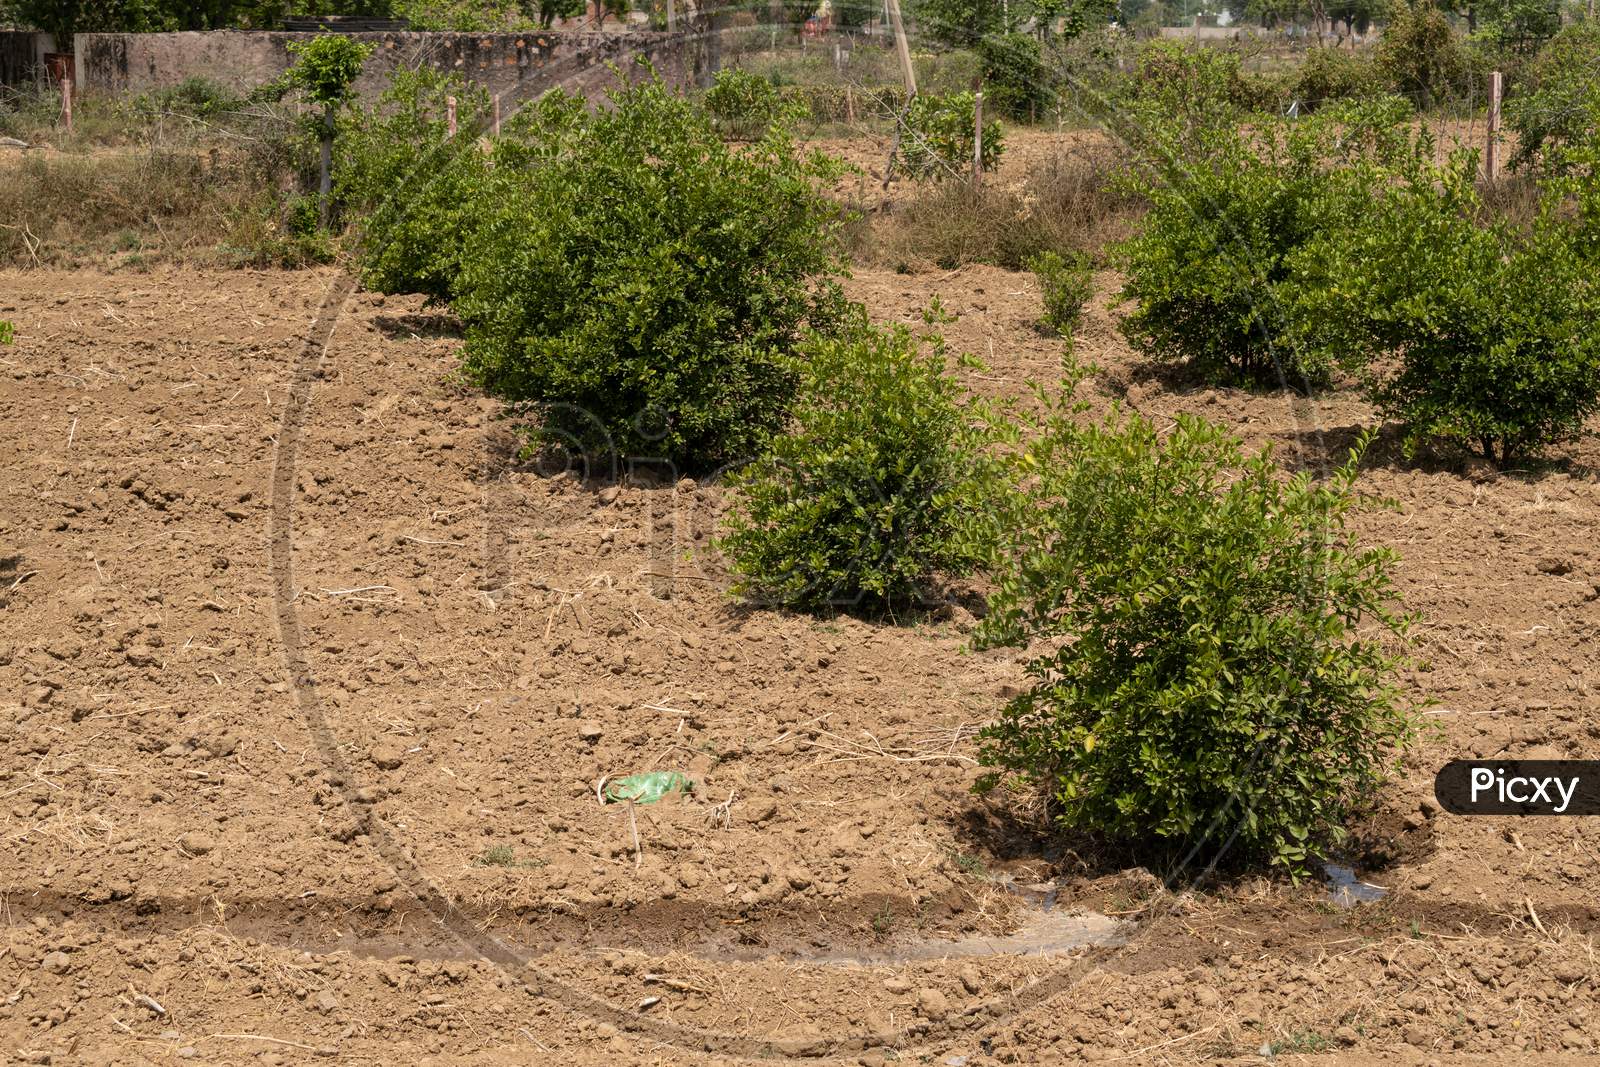 irrigation or watering of the lemon plants in the garden at a farm